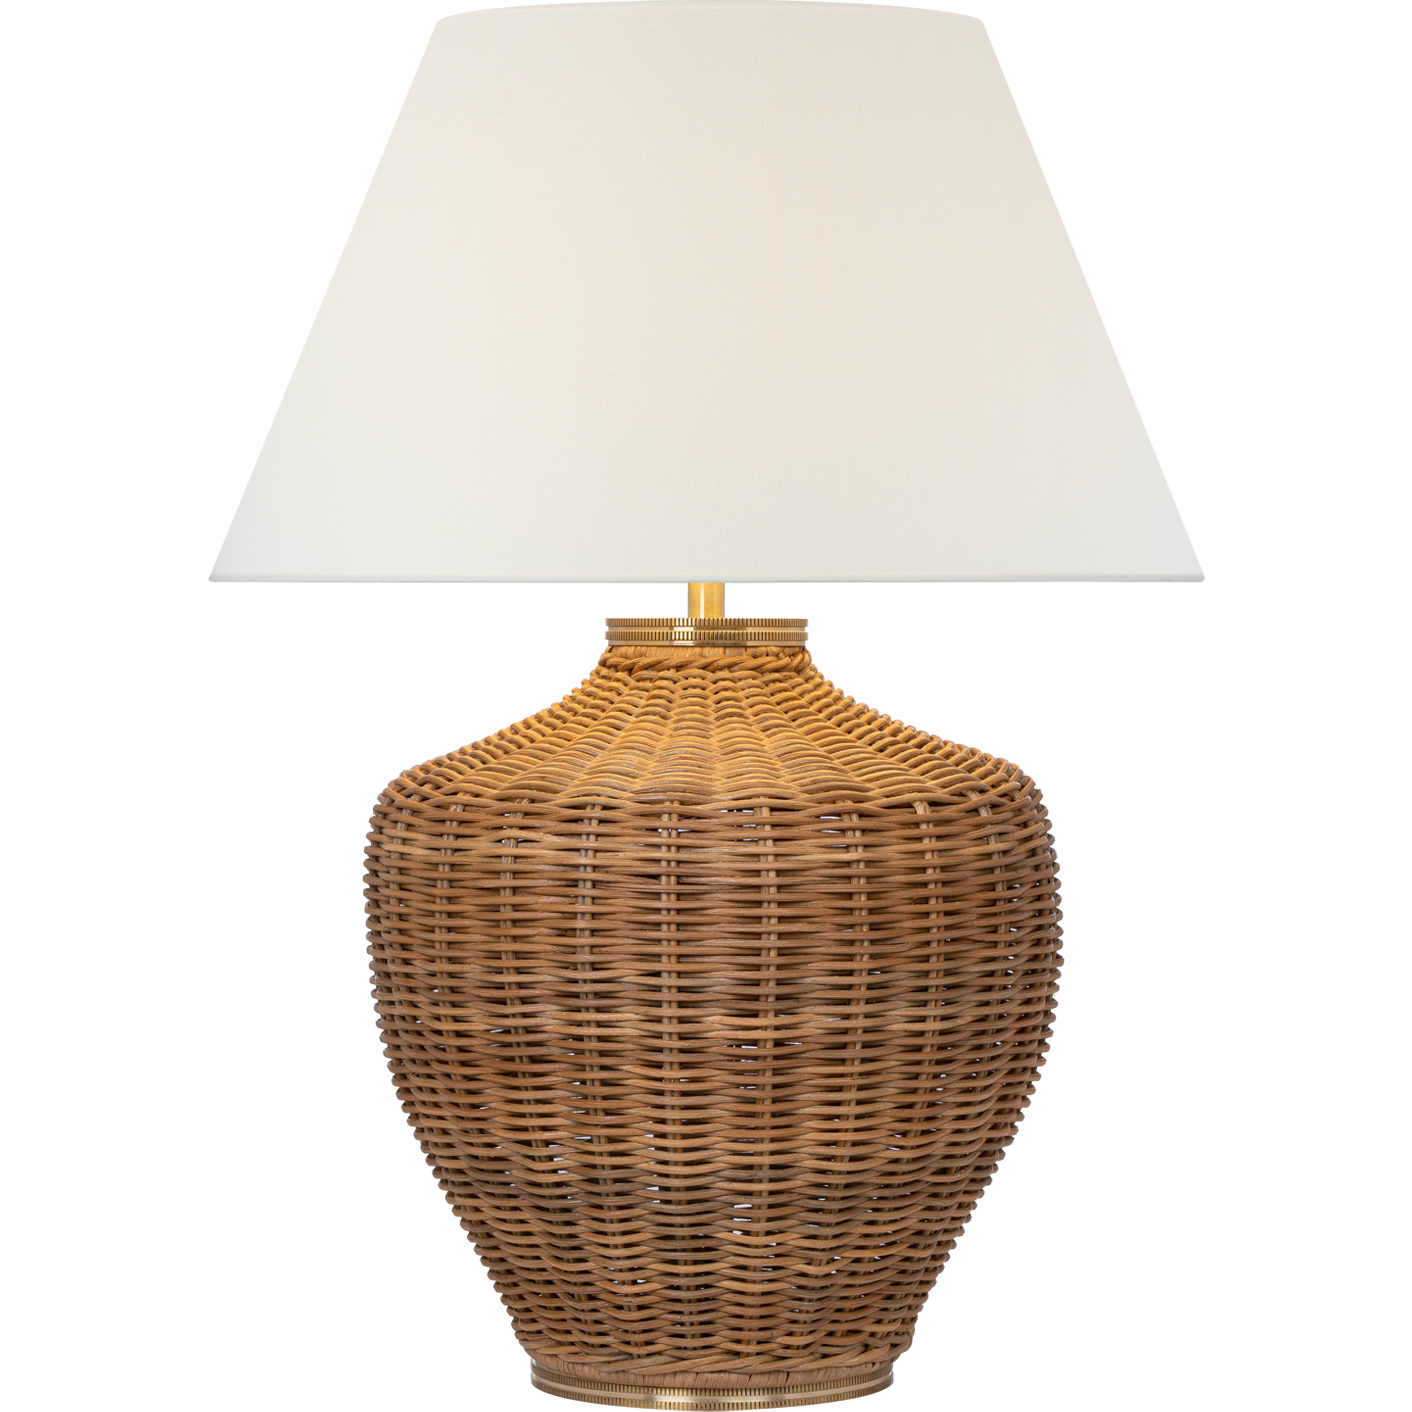 Evie Large Table Lamp